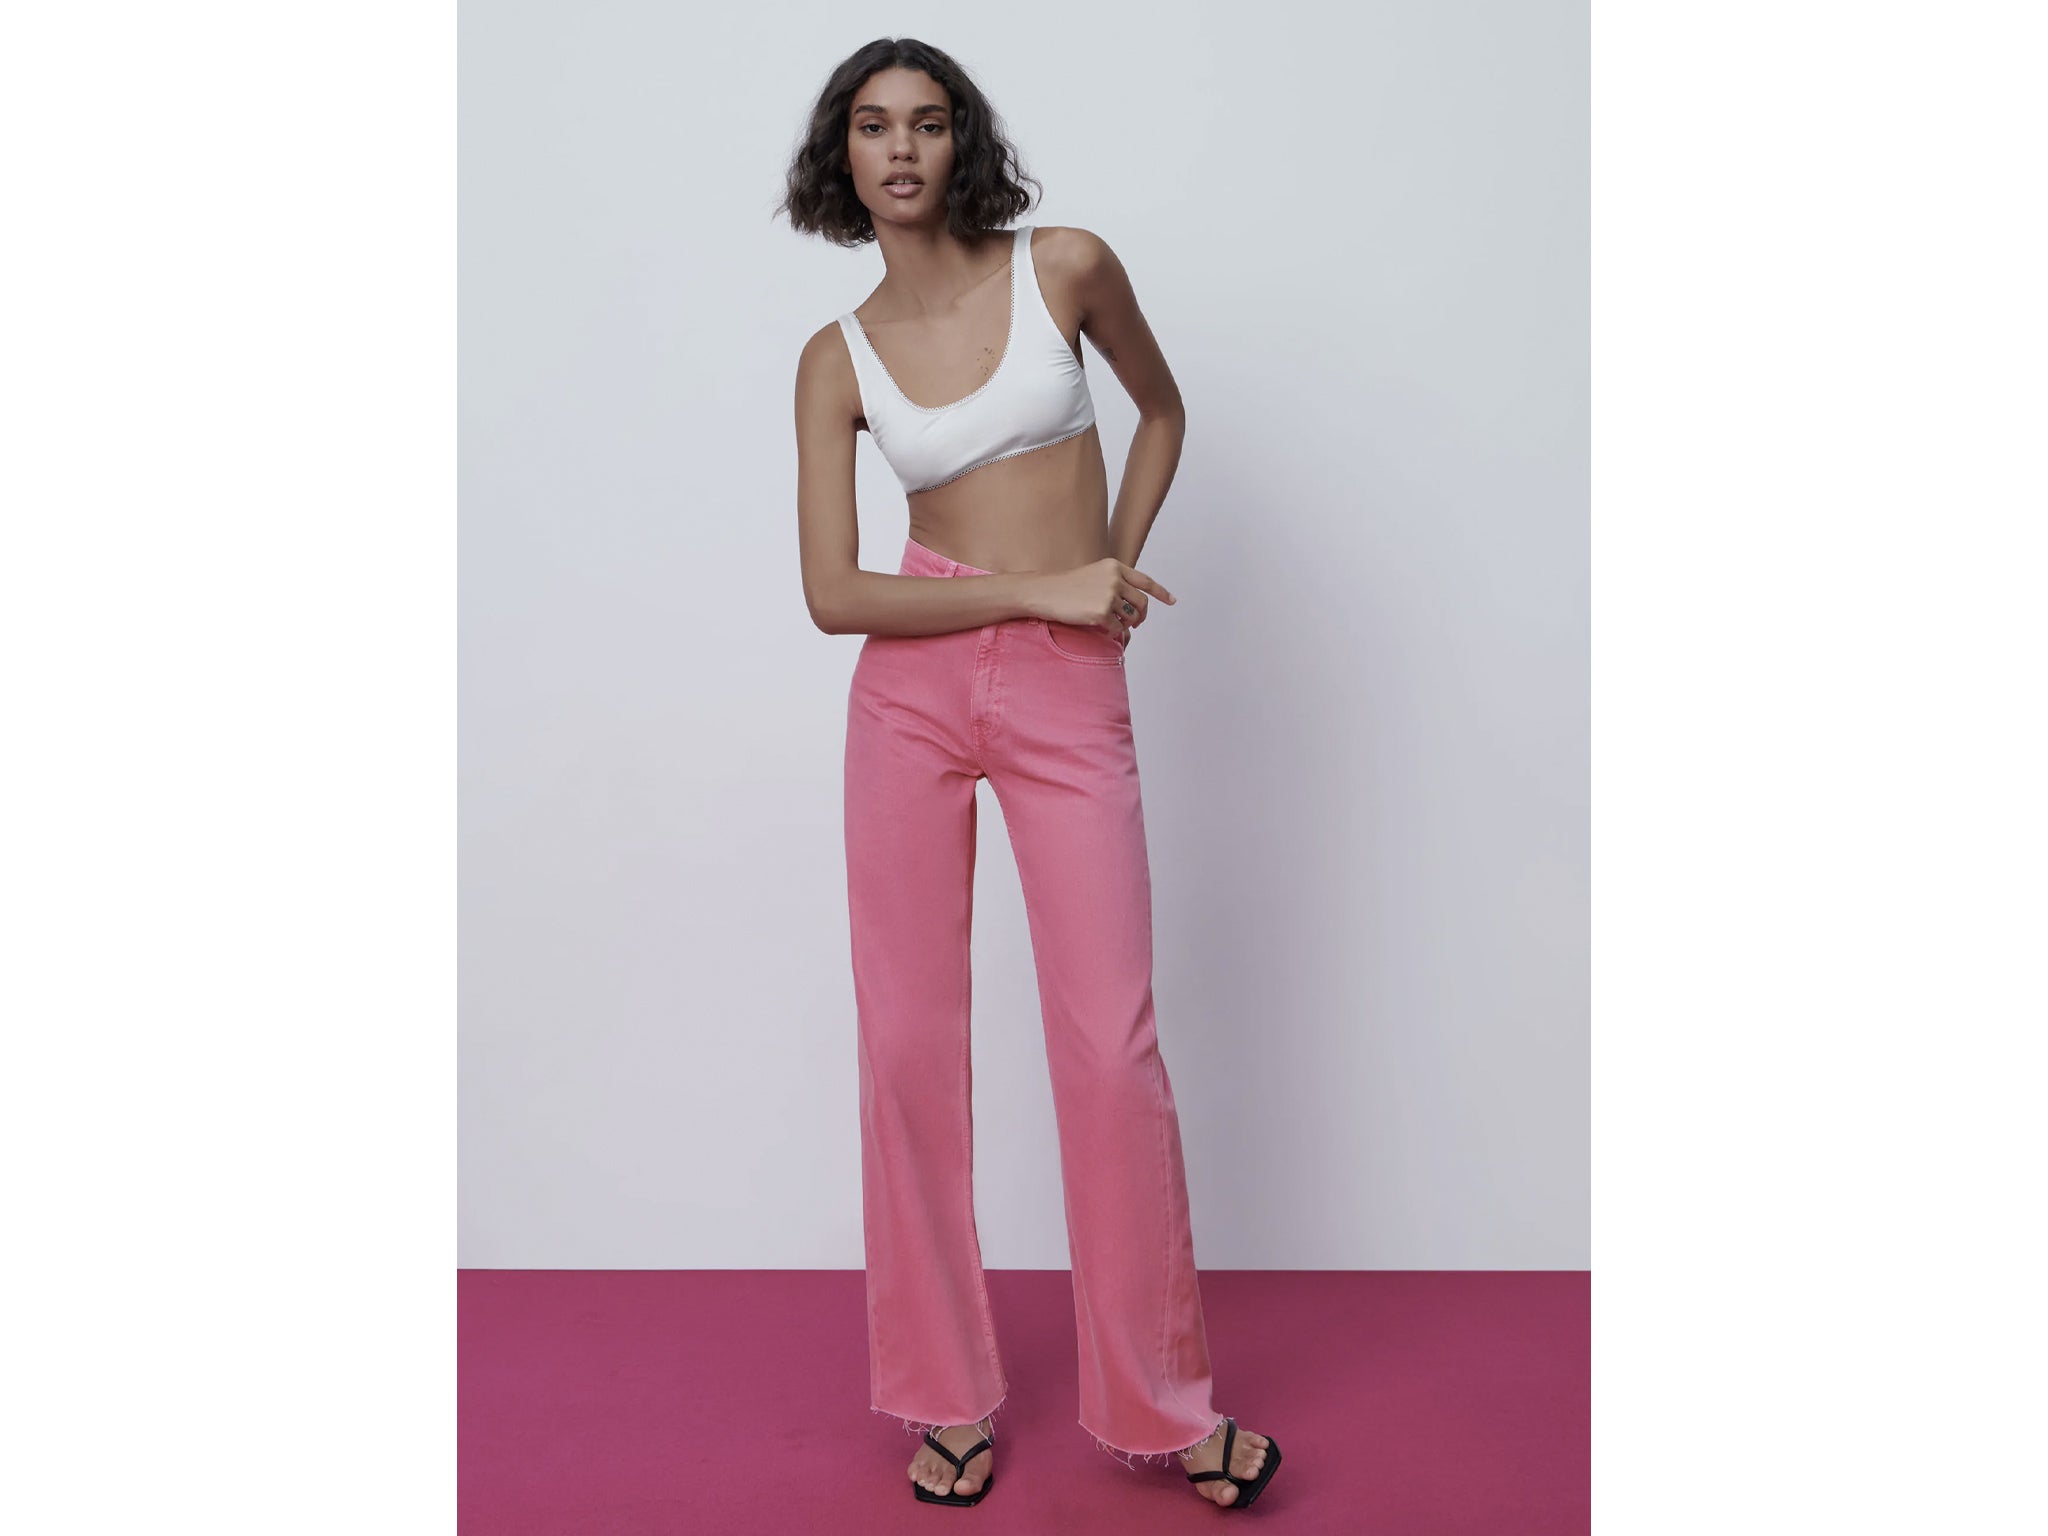 Zara's wide leg jeans are going viral on TikTok | The Independent